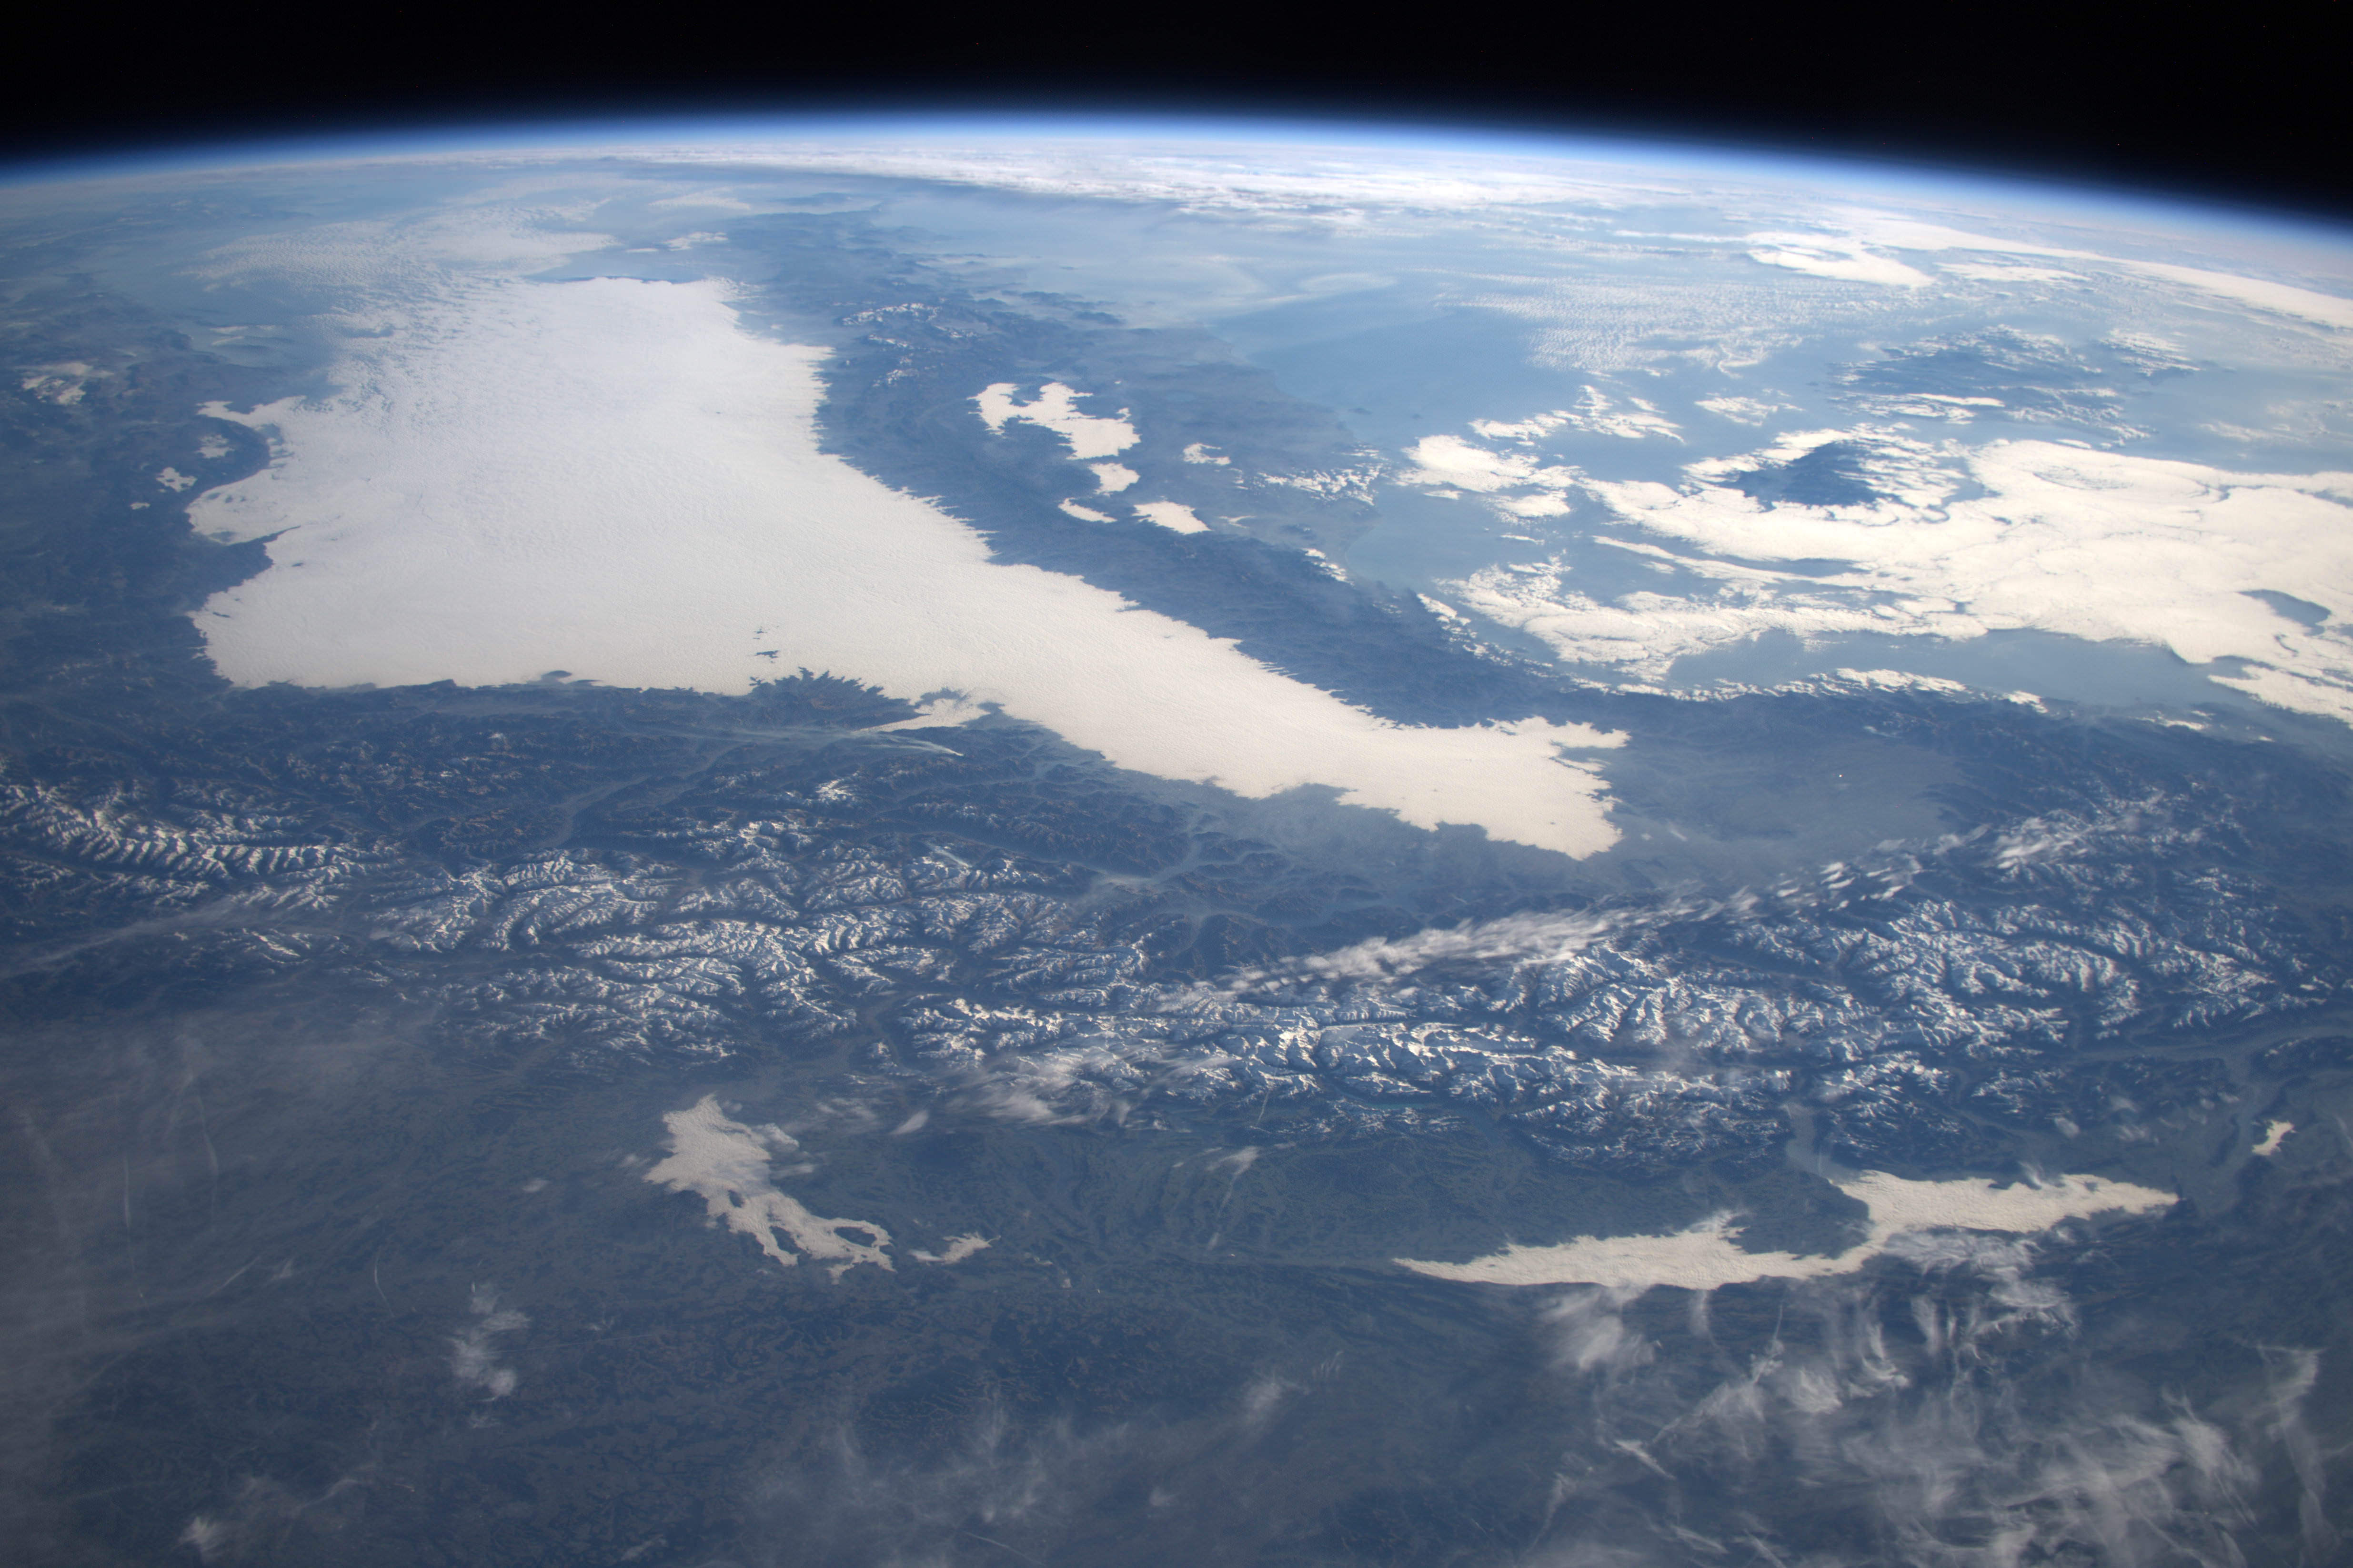 The Alps in Winter."There may not be much snow in the Alps this winter but they still look stunning from here! #Principia.” Credit: ESA/NASA/Tim Peake/@astro_timpeake